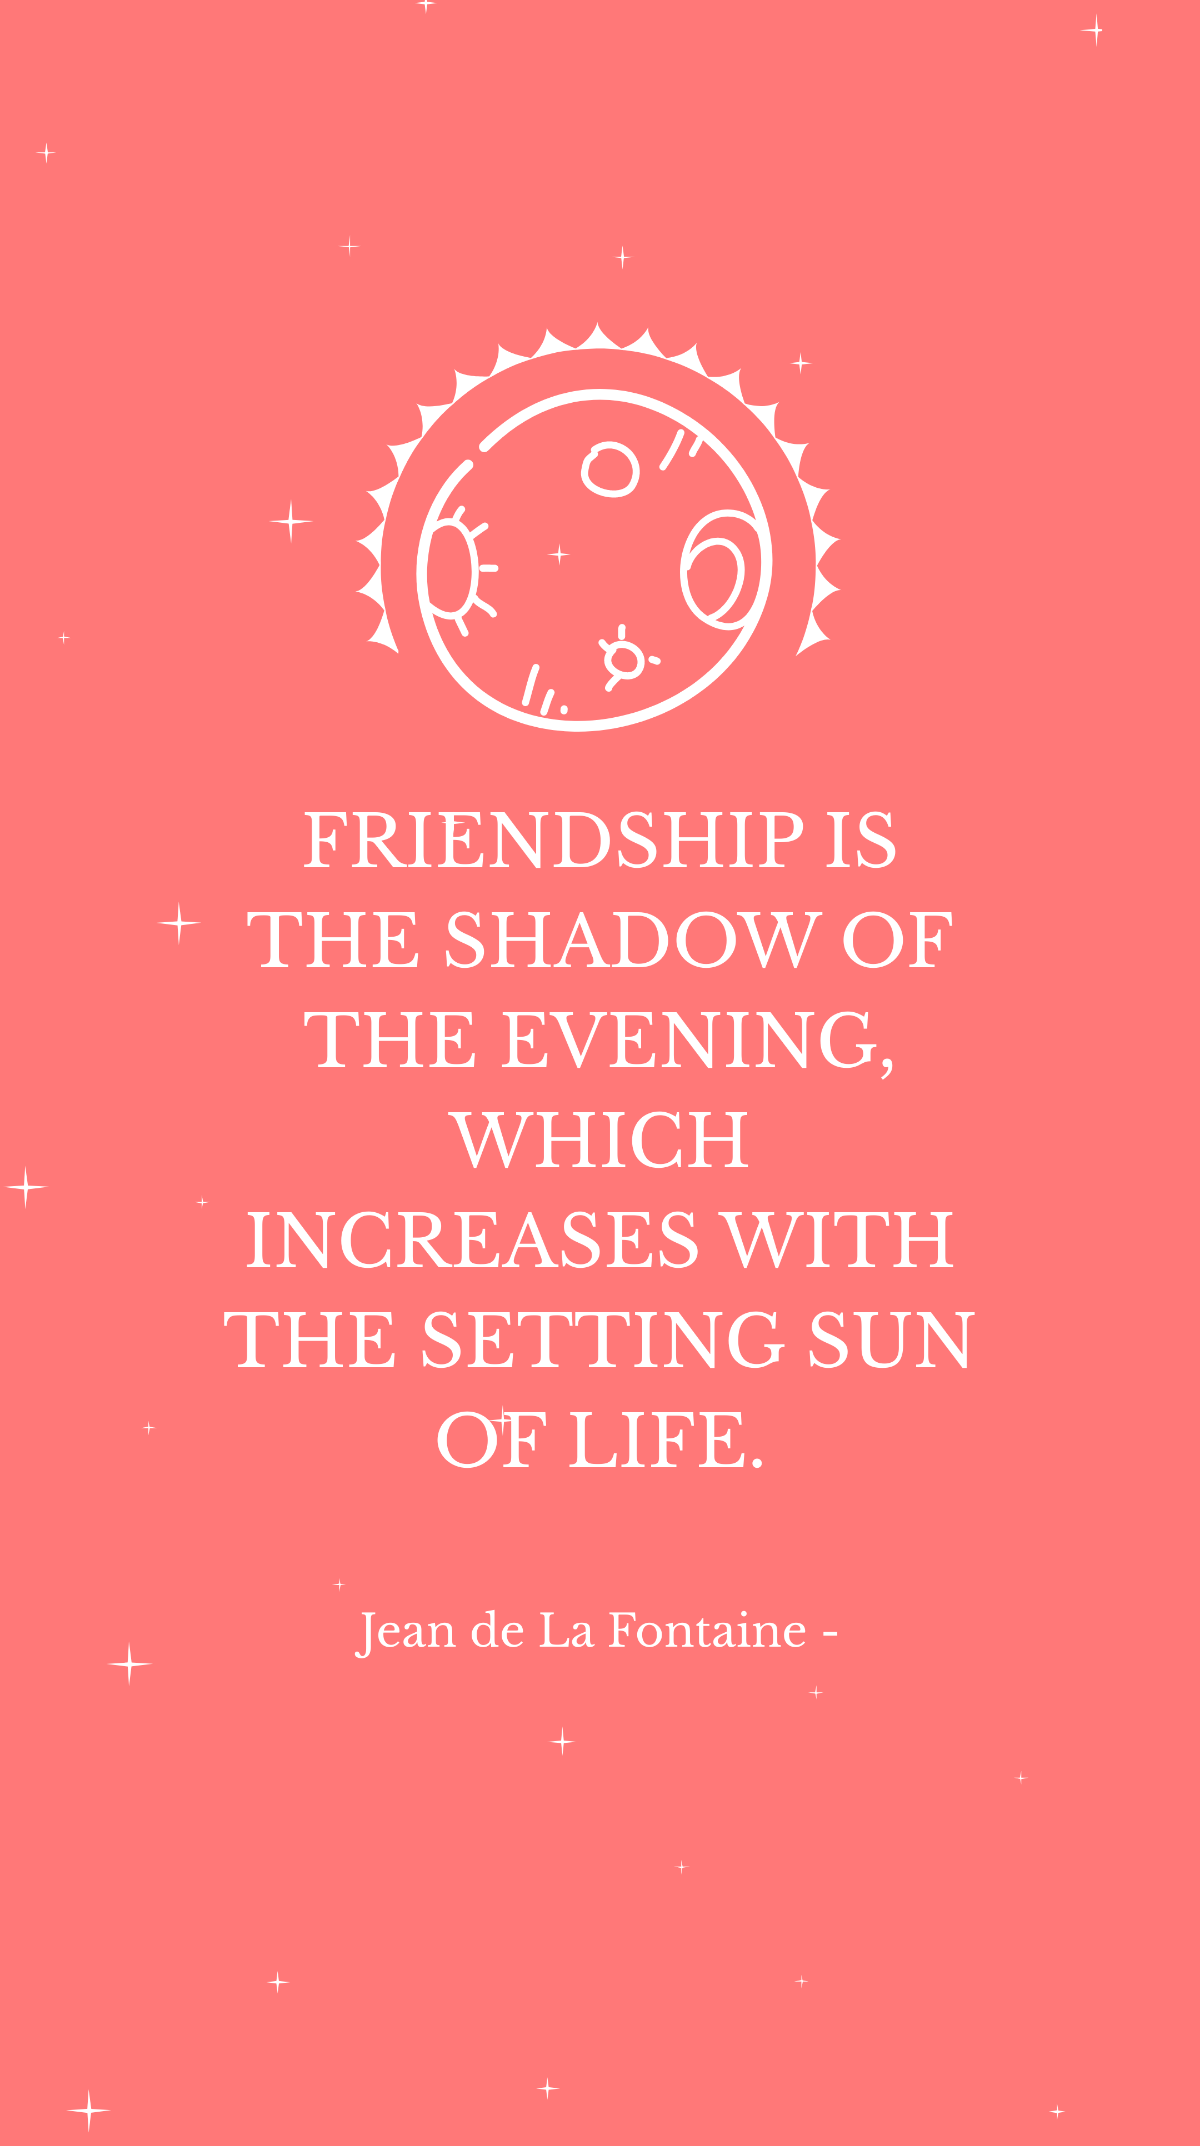 Jean de La Fontaine - Friendship is the shadow of the evening, which increases with the setting sun of life. Template